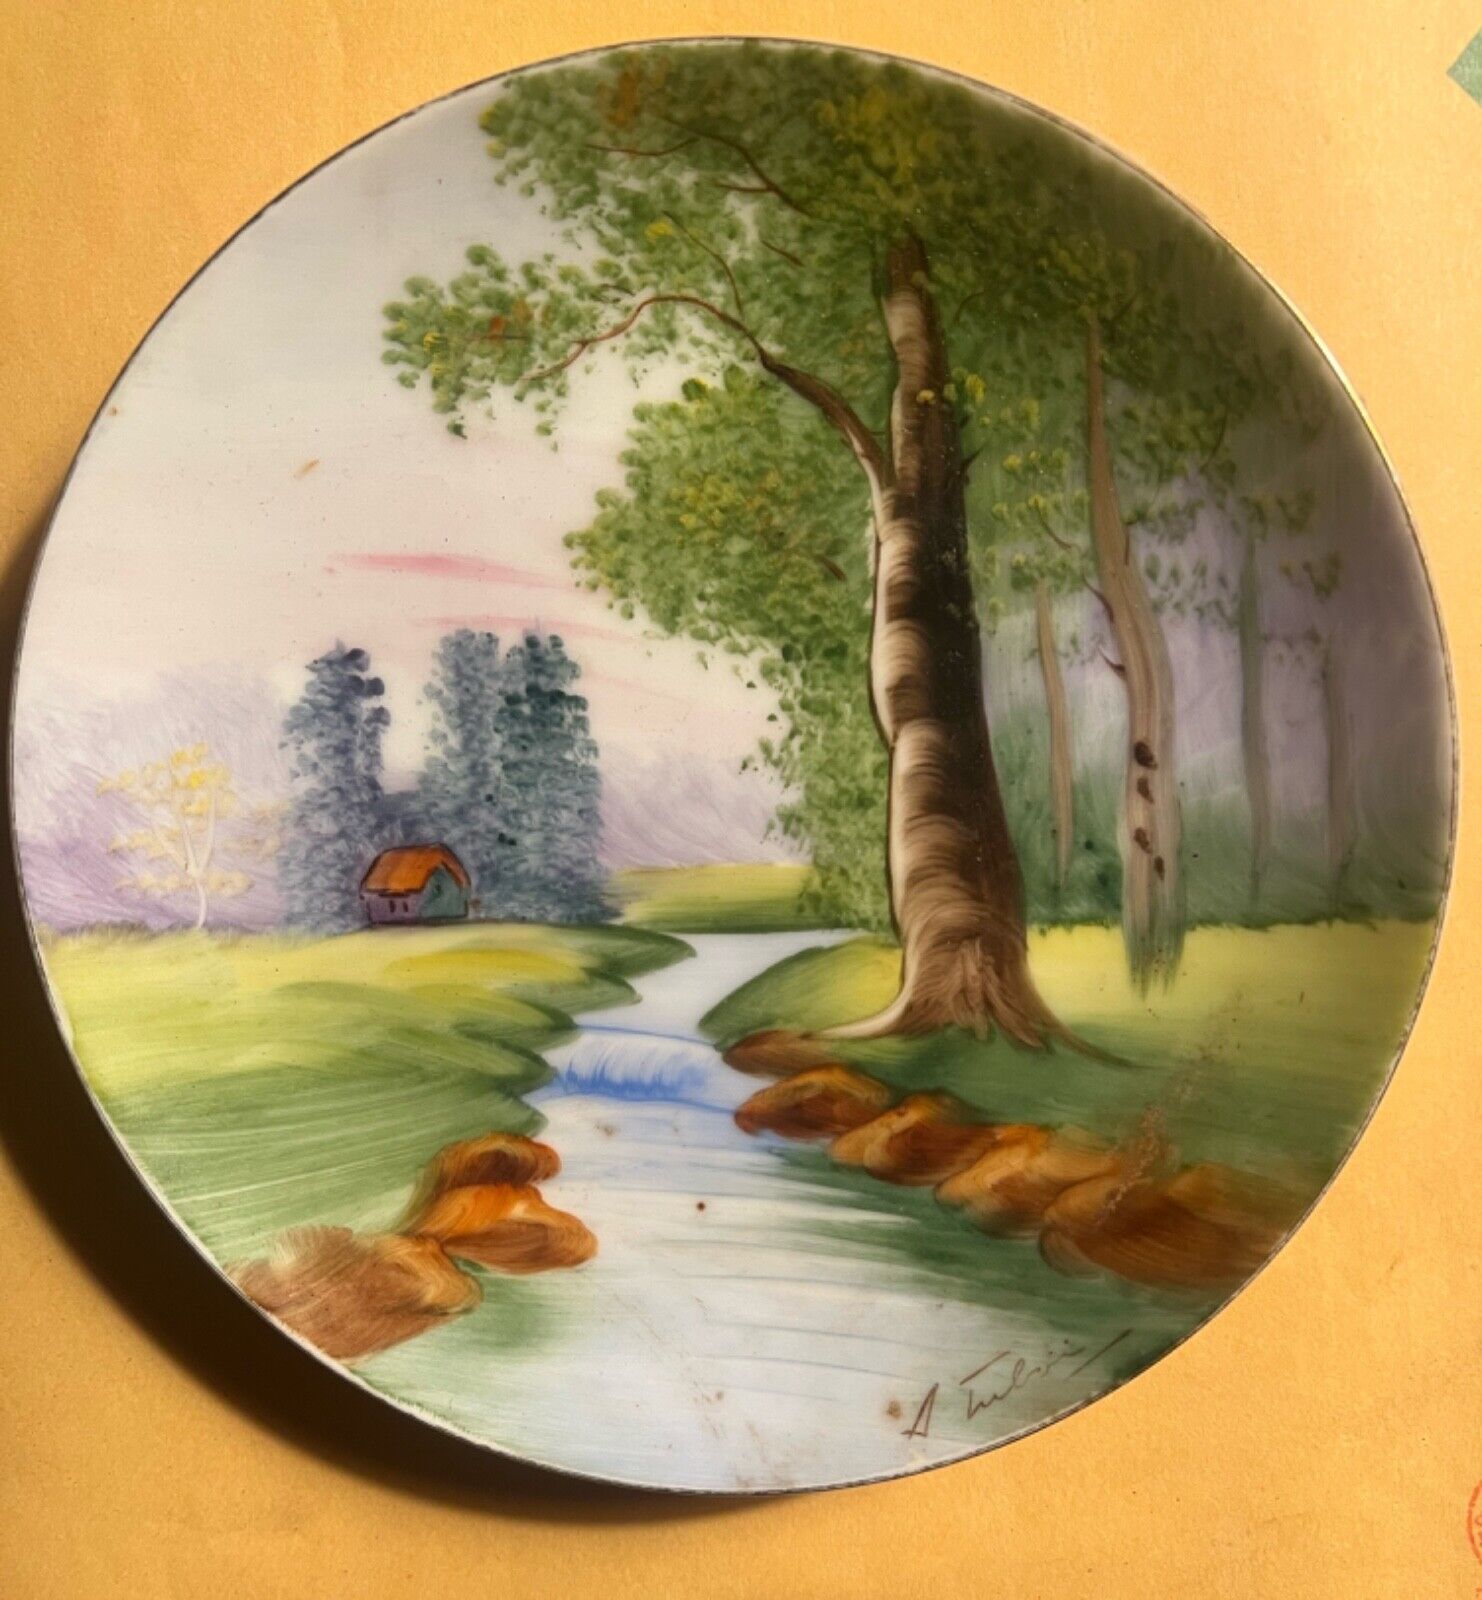 Vintage UCAGCO CHINA Hand Painted Landscape Plate by Japanese Artist, 8.25